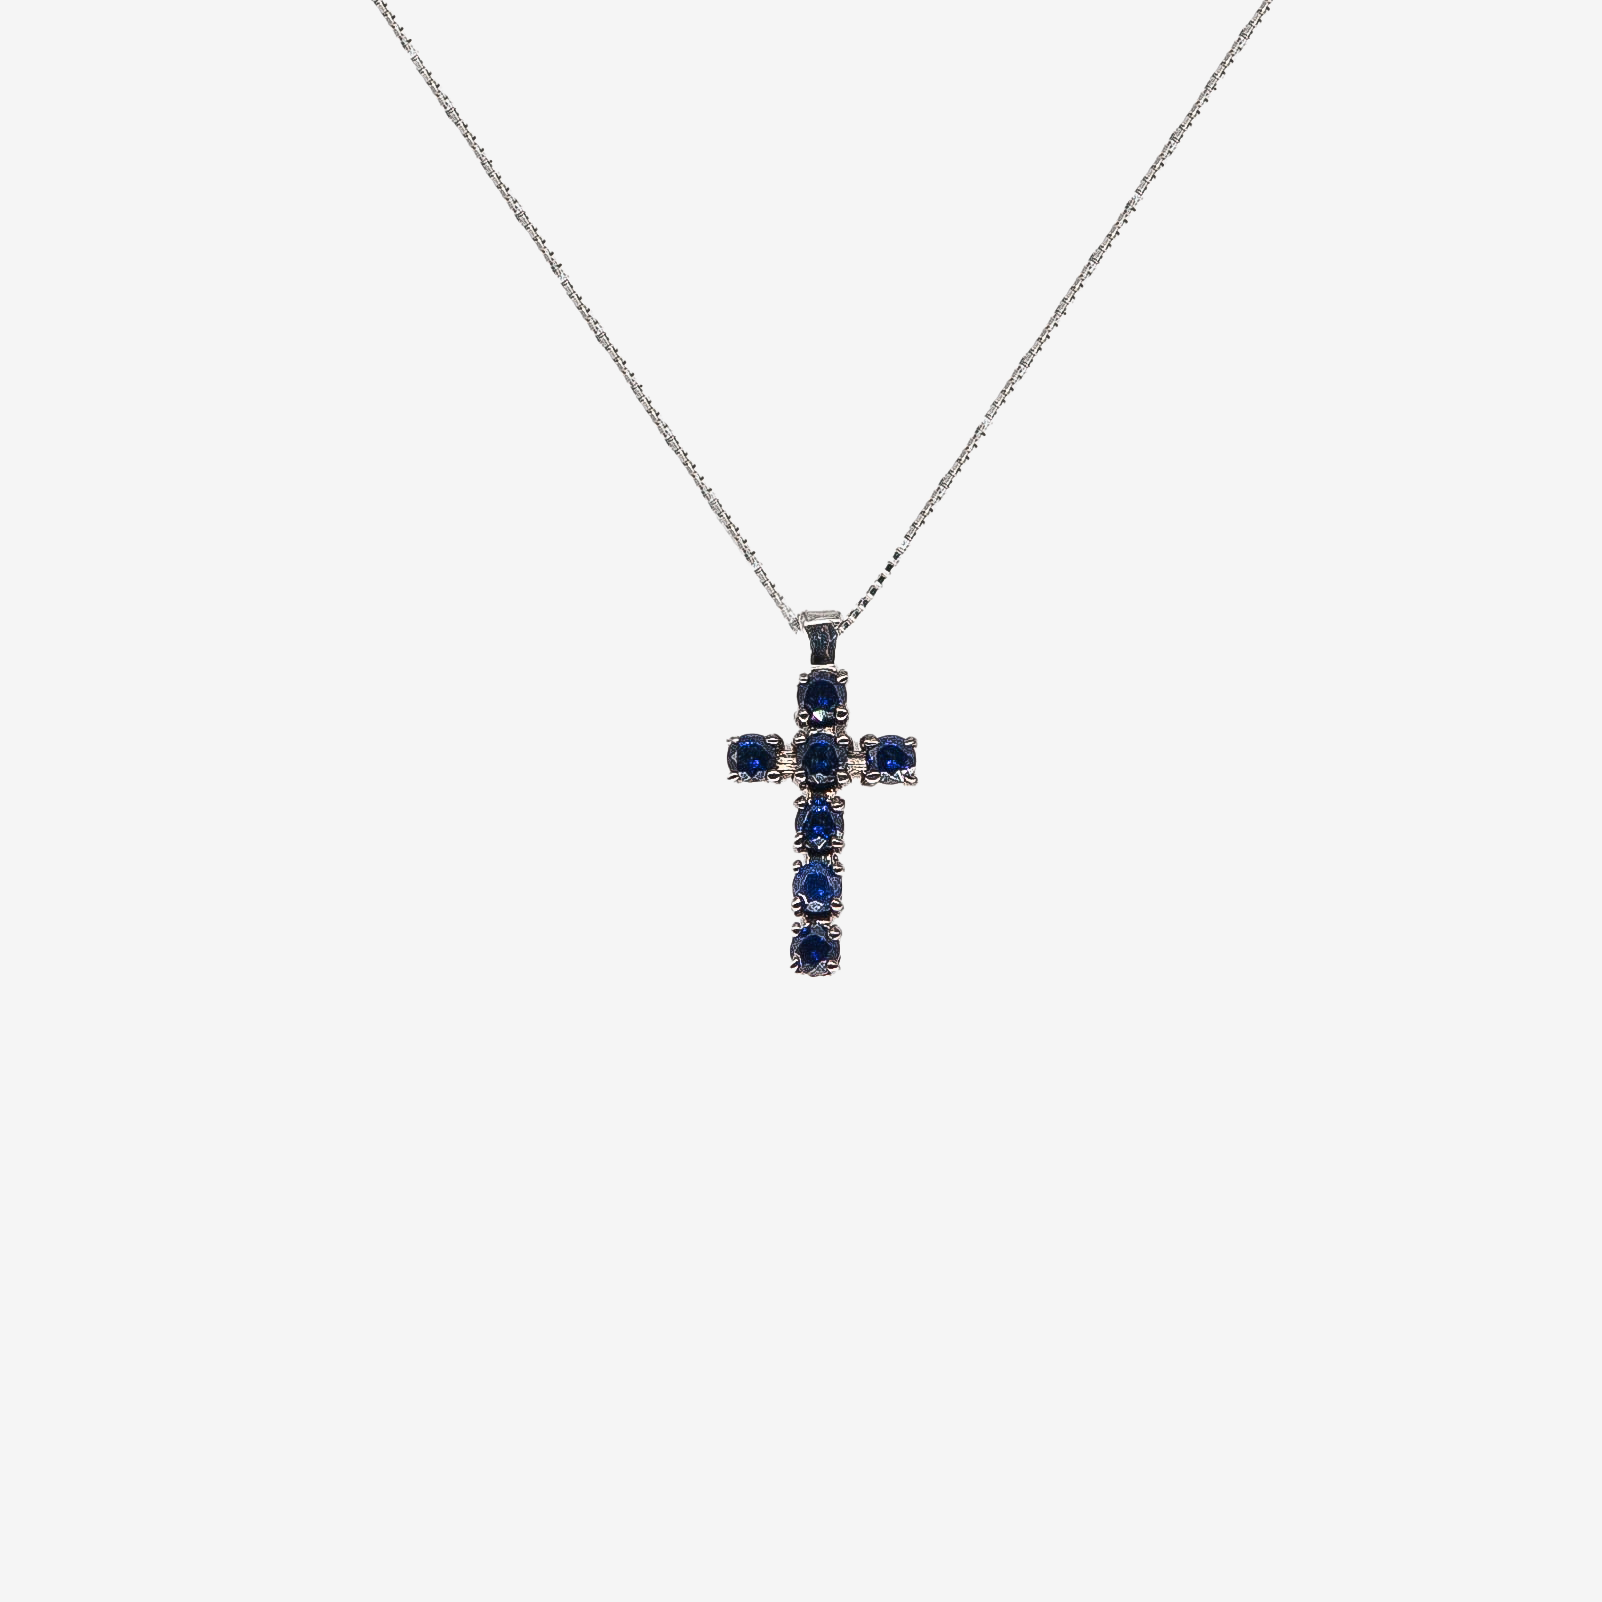 Cross necklace with sapphires